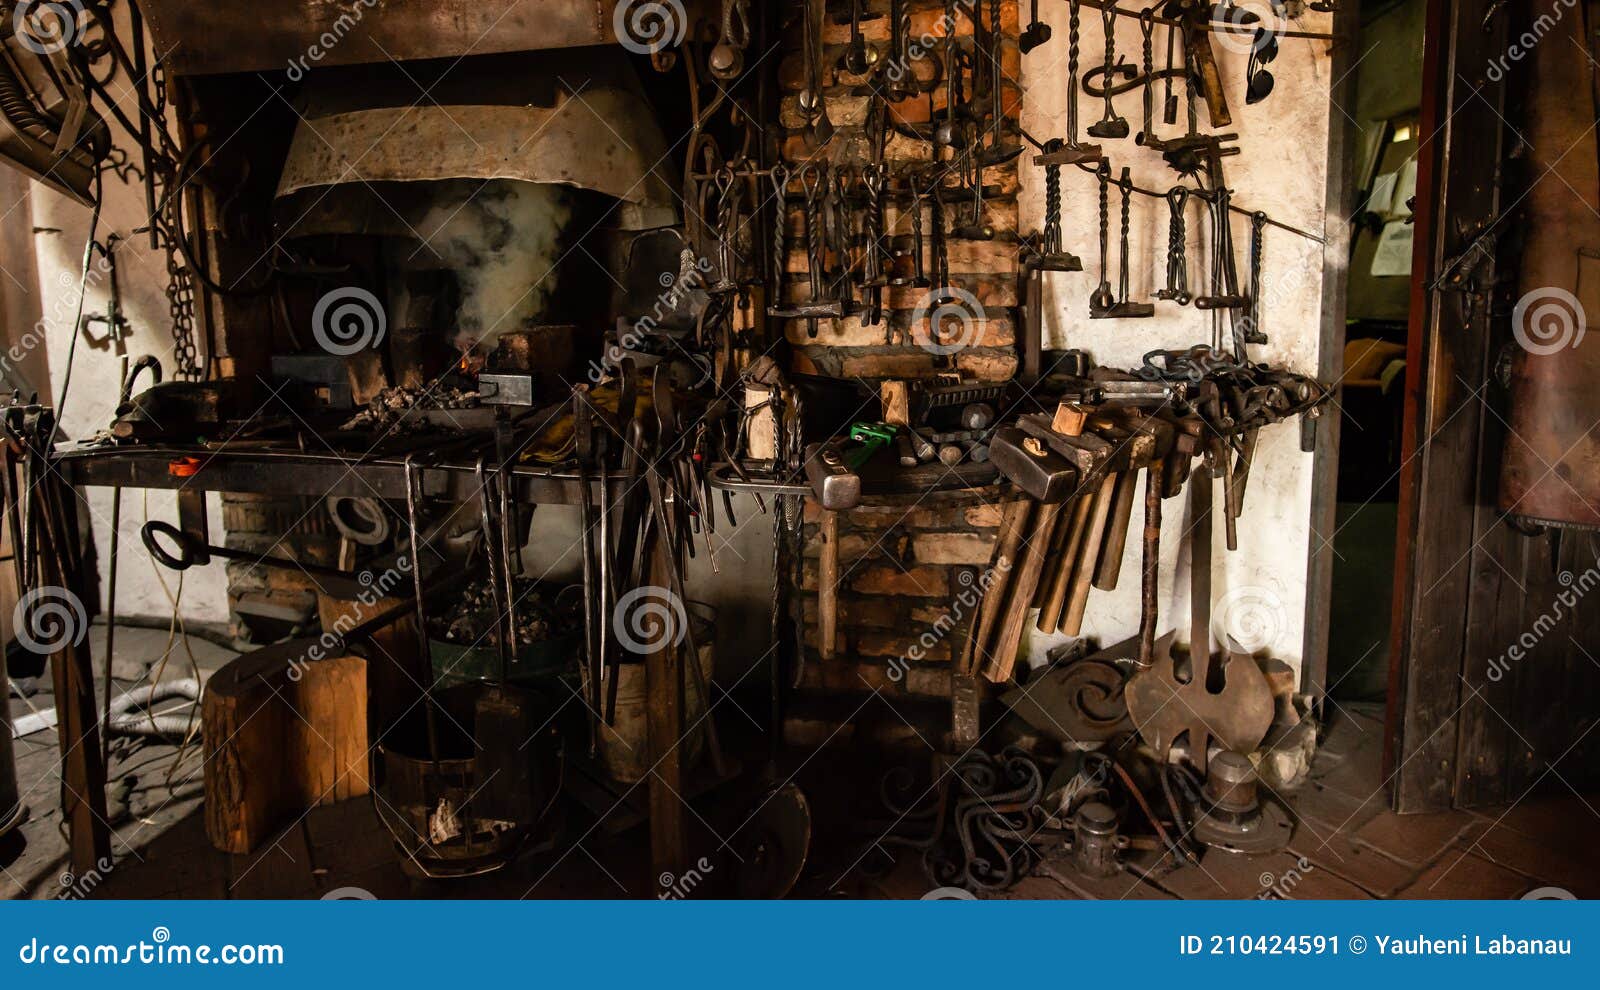 interior of blacksmith forge with tools hanging on wall and anvil and hammer ready to be used. furnace formant